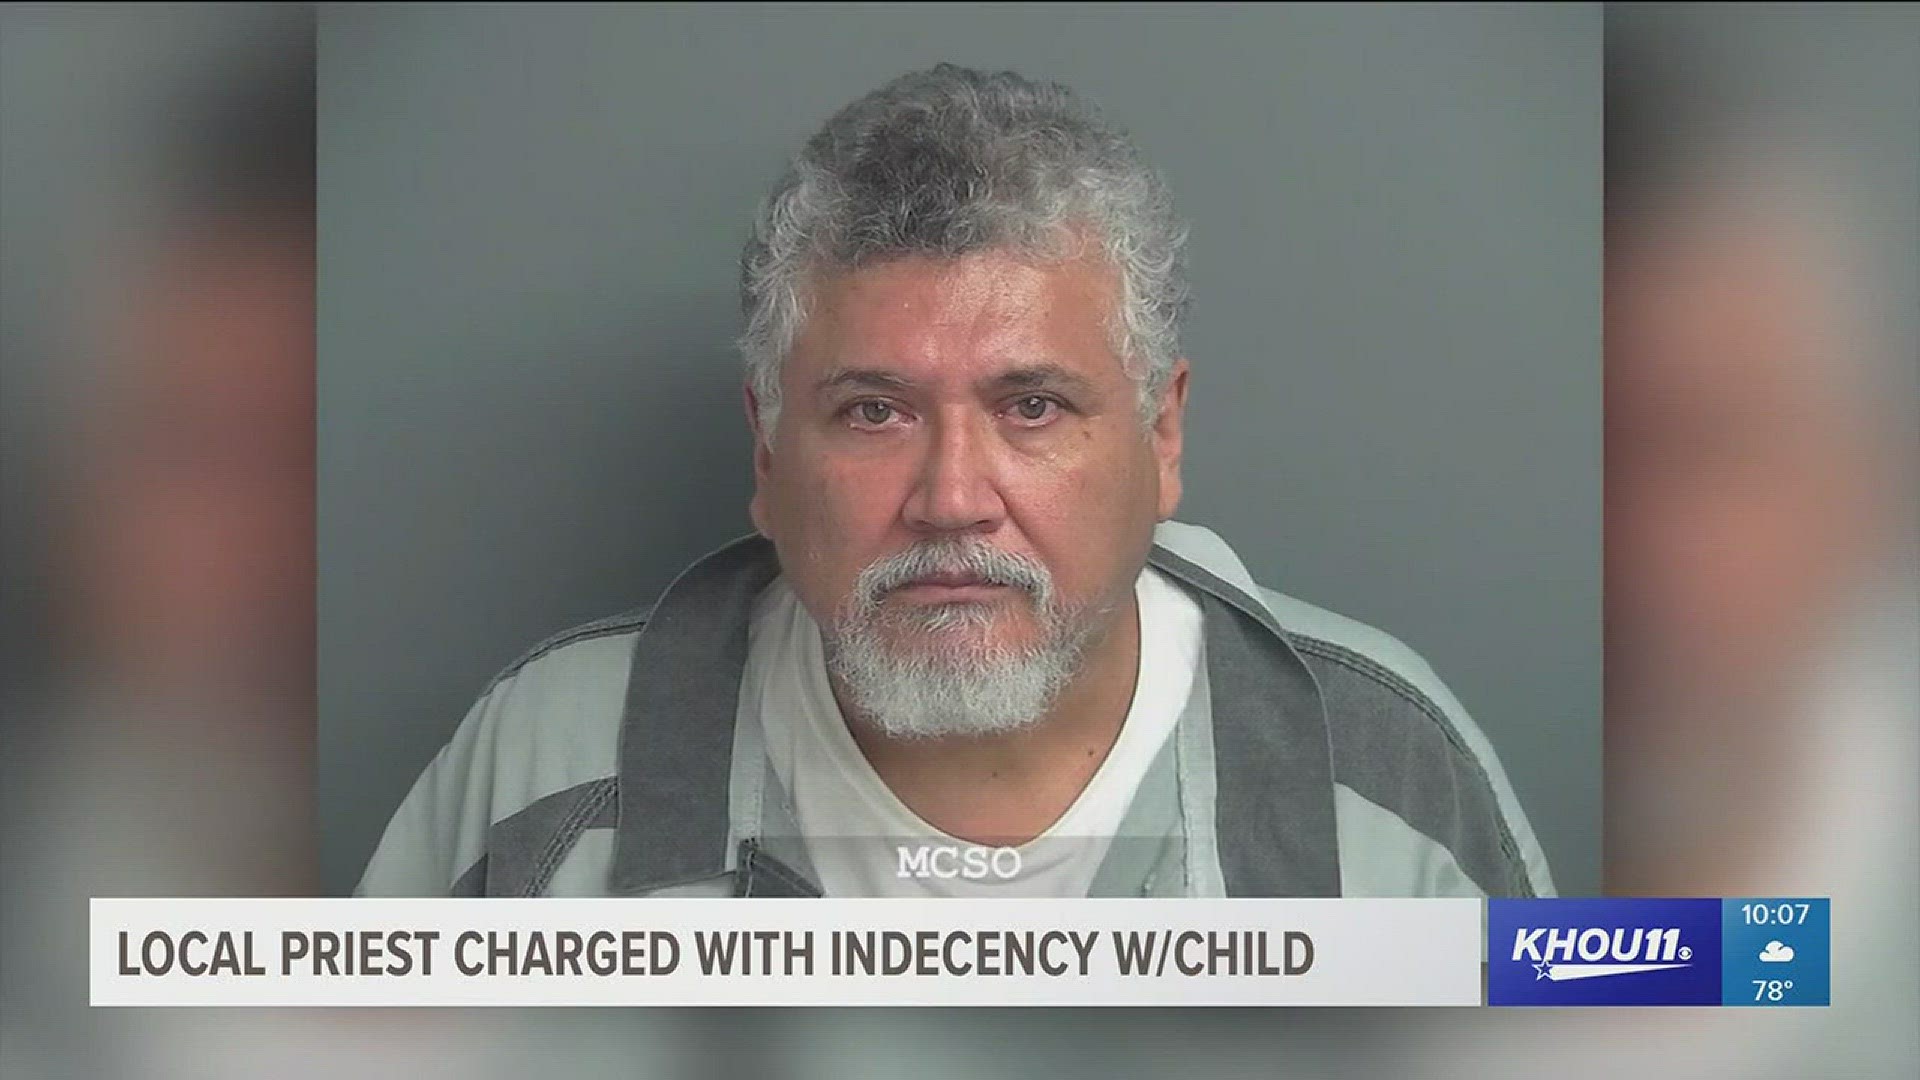 The priest of St John Fisher Catholic Church in Richmond, has been charged with four counts of indecency with a child, according to the Conroe Police Department. The alleges abuse happened at his previous parish, the Sacred Heart Catholic Church in Conroe